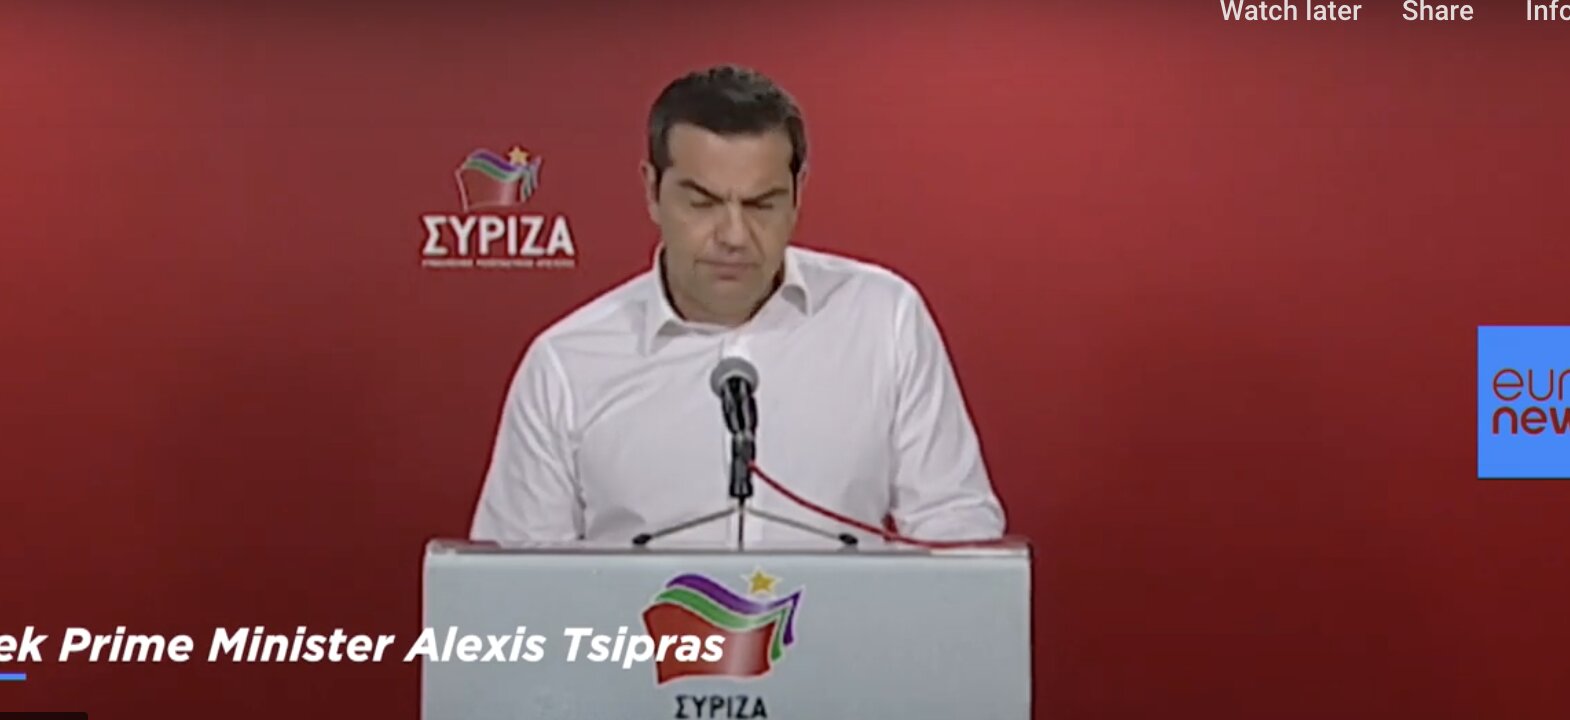 Greece headed to snap elections after Syriza defeat in EU vote